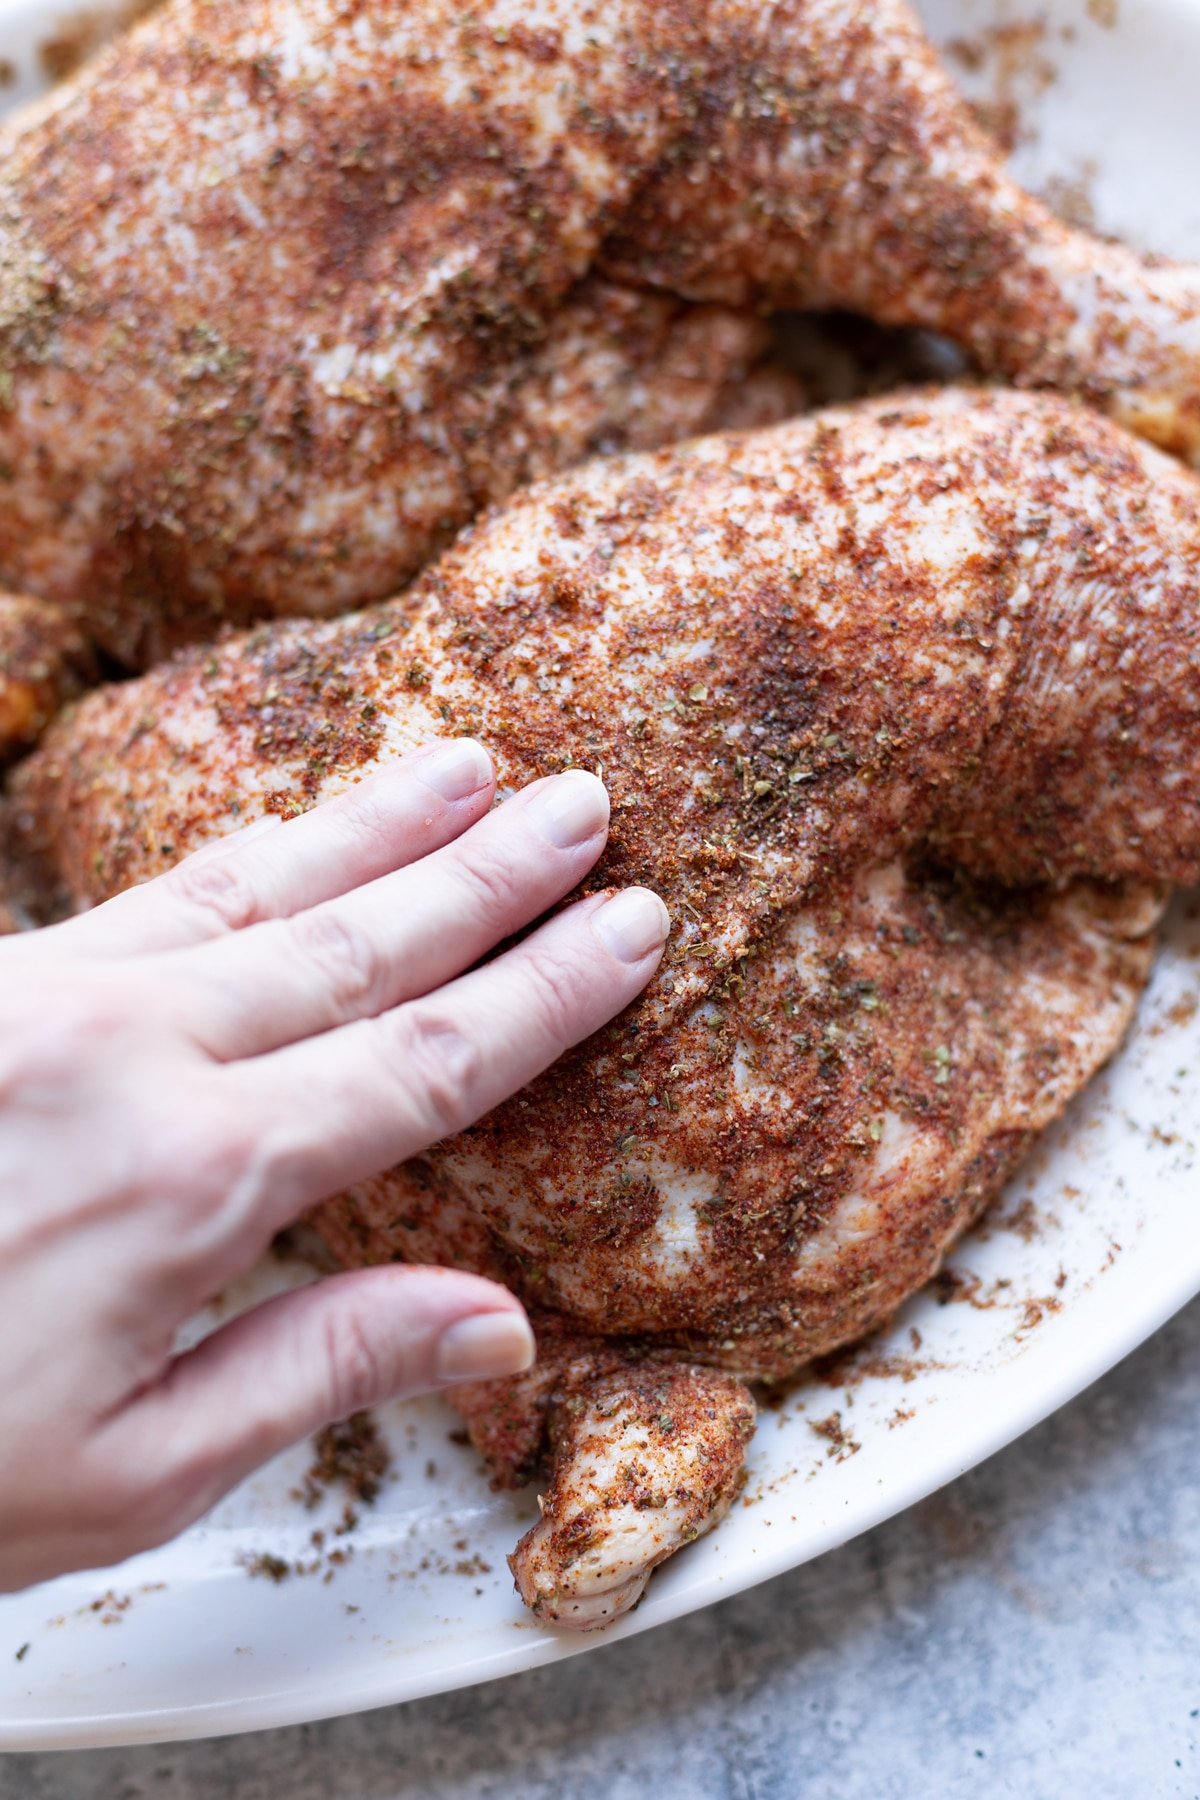 Person using their hand to apply BBQ rub to chicken.